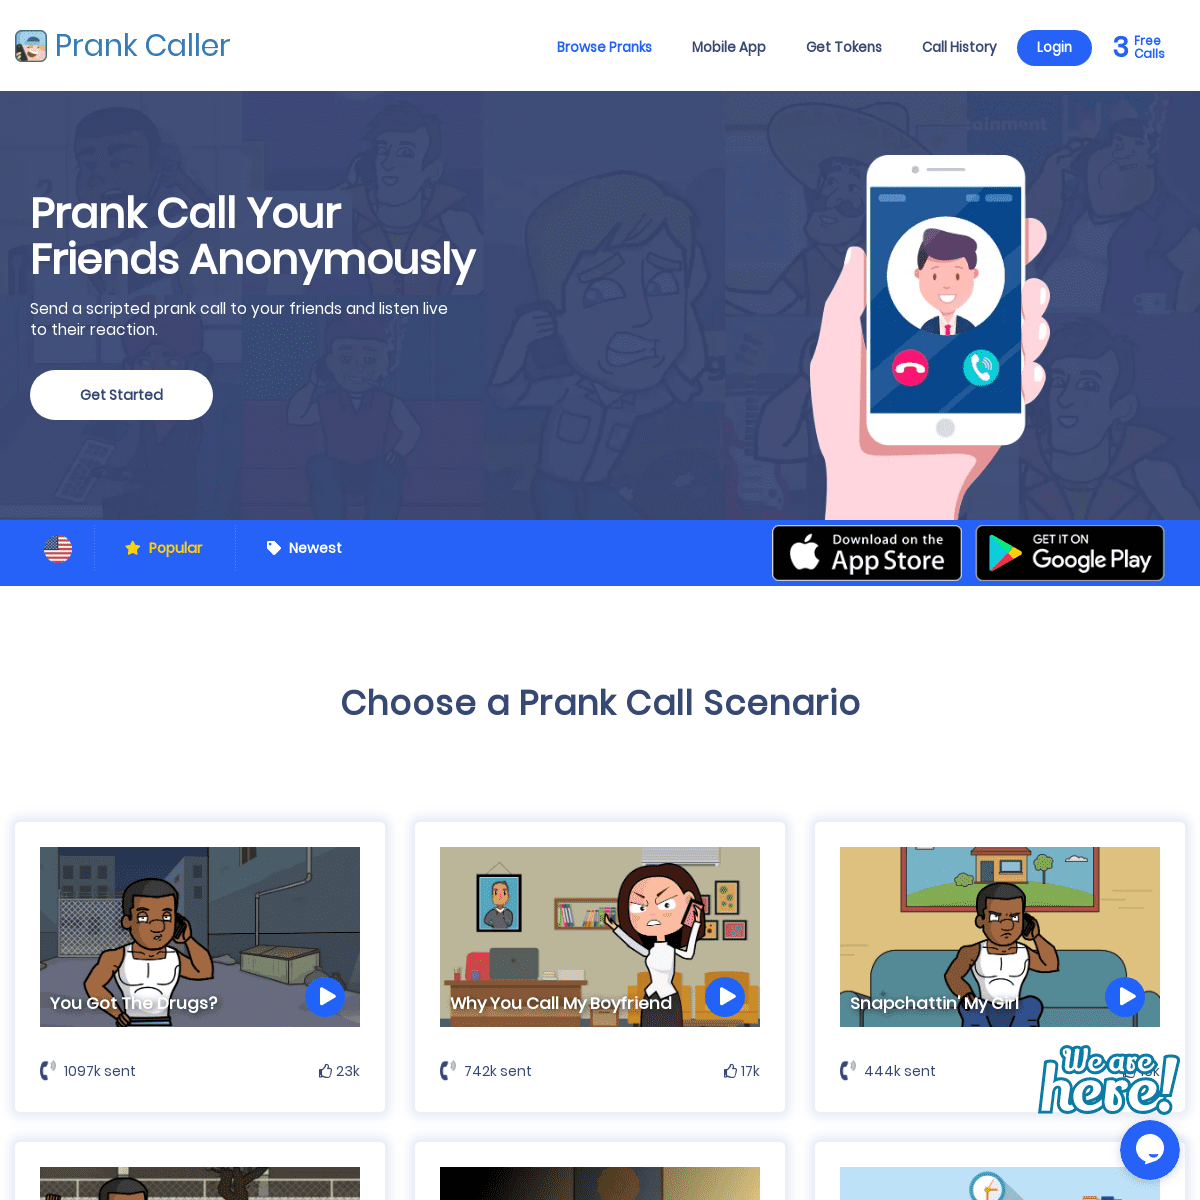 A complete backup of prankcaller.io